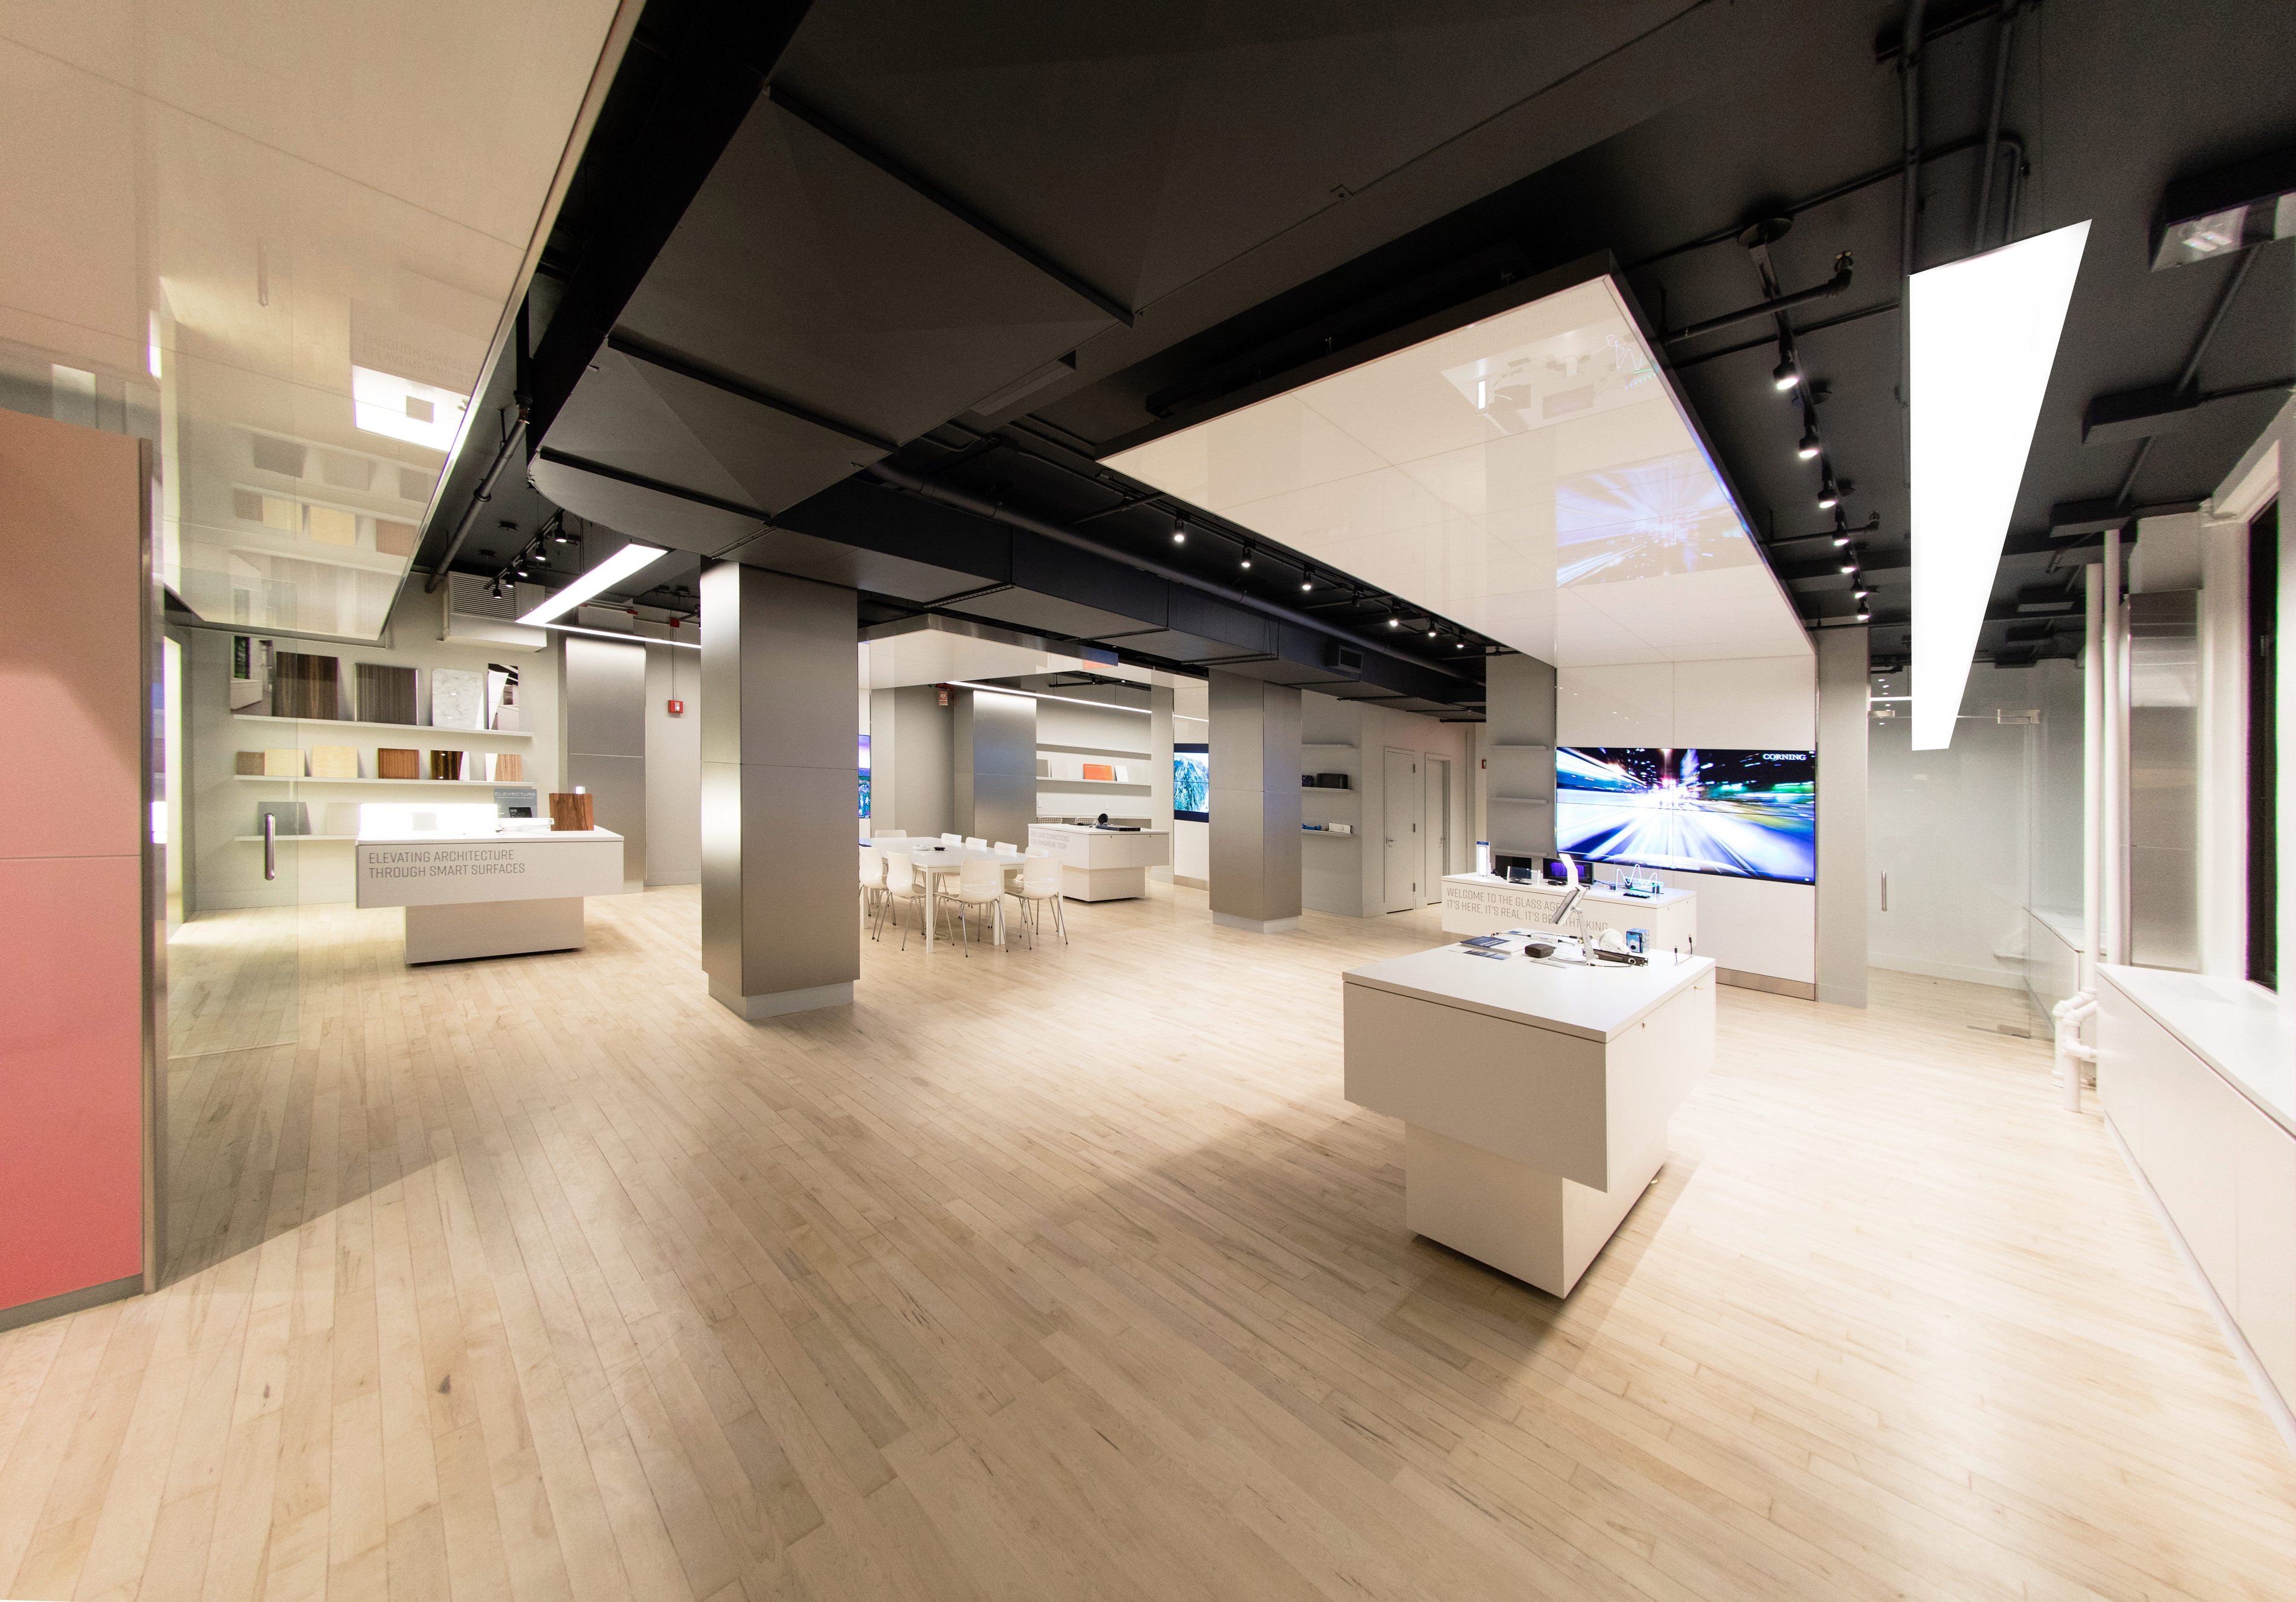 Commercial Showroom NYC Architect Architecture Renovation Renovate Elevecture Glass Custom Digital Display Modular Light Panels Display Integrated Lighting Branding